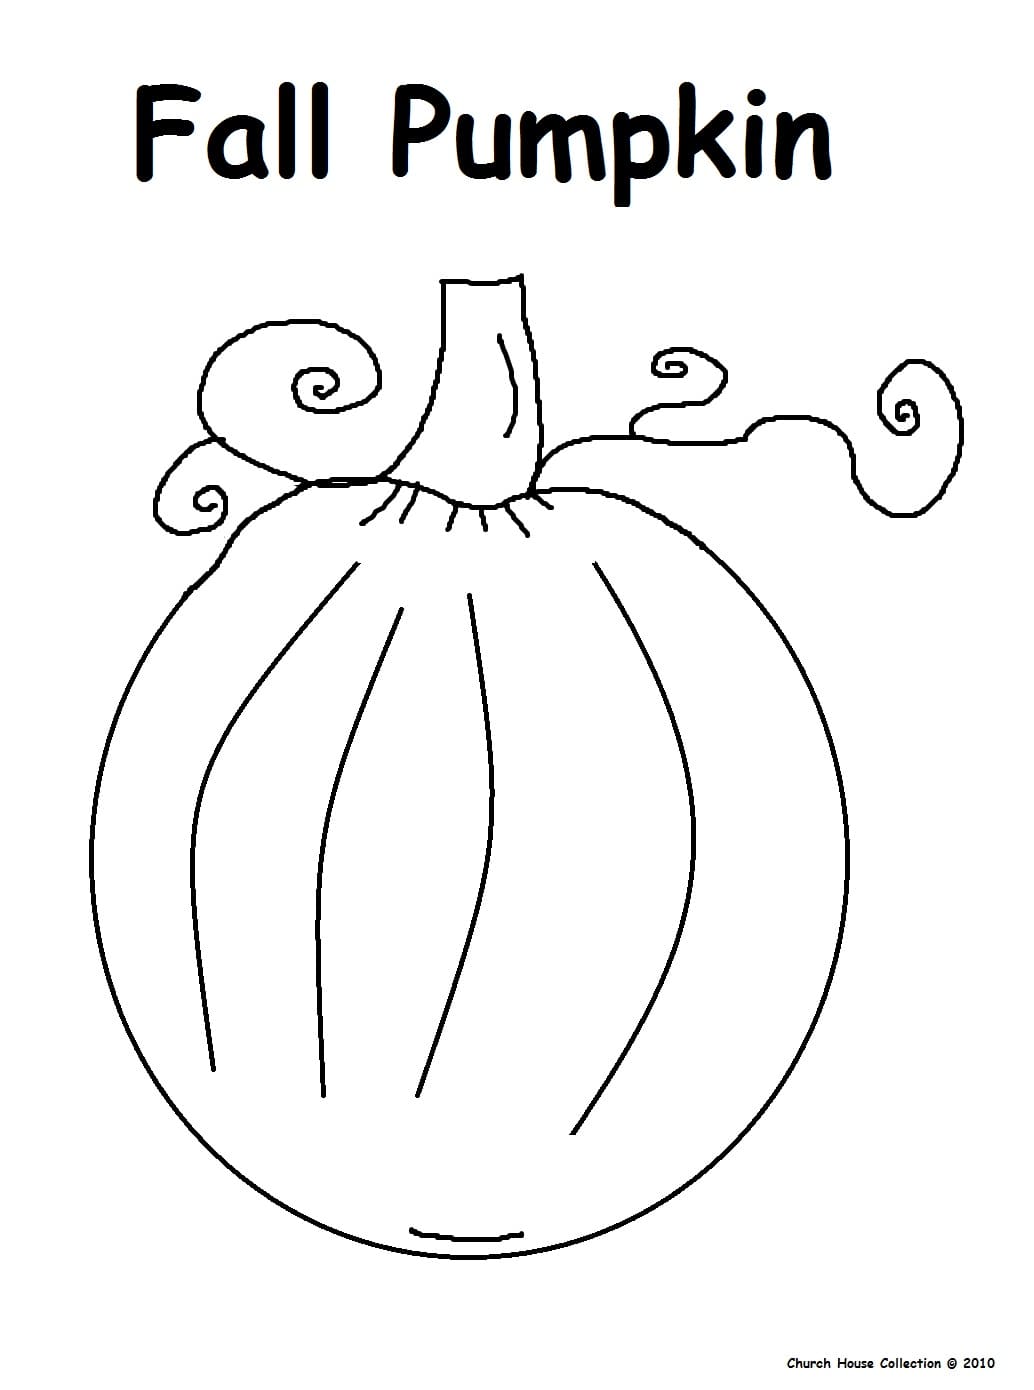 Fall Pumpkin For Kids Coloring Page